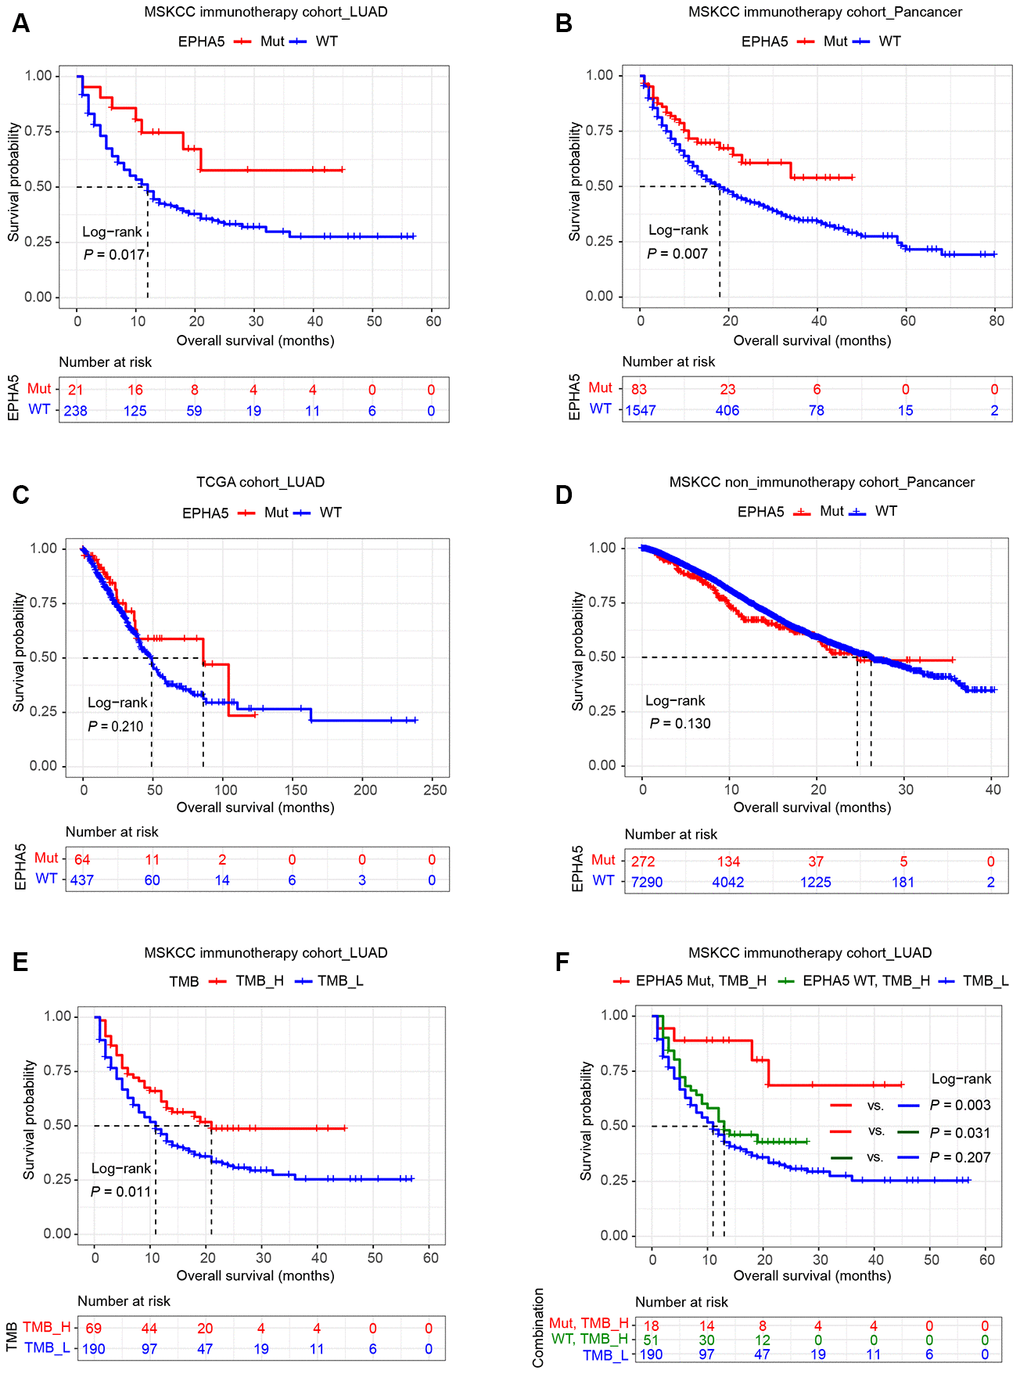 Relation of EPHA5 to clinical outcomes in LUAD. Patients with tumors harboring EPHA5 mutations had longer OS times than those with tumors without EPHA5 mutations in the MSKCC immunotherapy cohort: (A) LUAD set, (B) pancancer set. The OS time did not differ significantly between EPHA5-Mut and EPHA5-WT patients not treated with immunotherapy in the (C) TCGA LUAD or (D) MSKCC pancancer cohort. (E) High tumor mutation burden (TMB